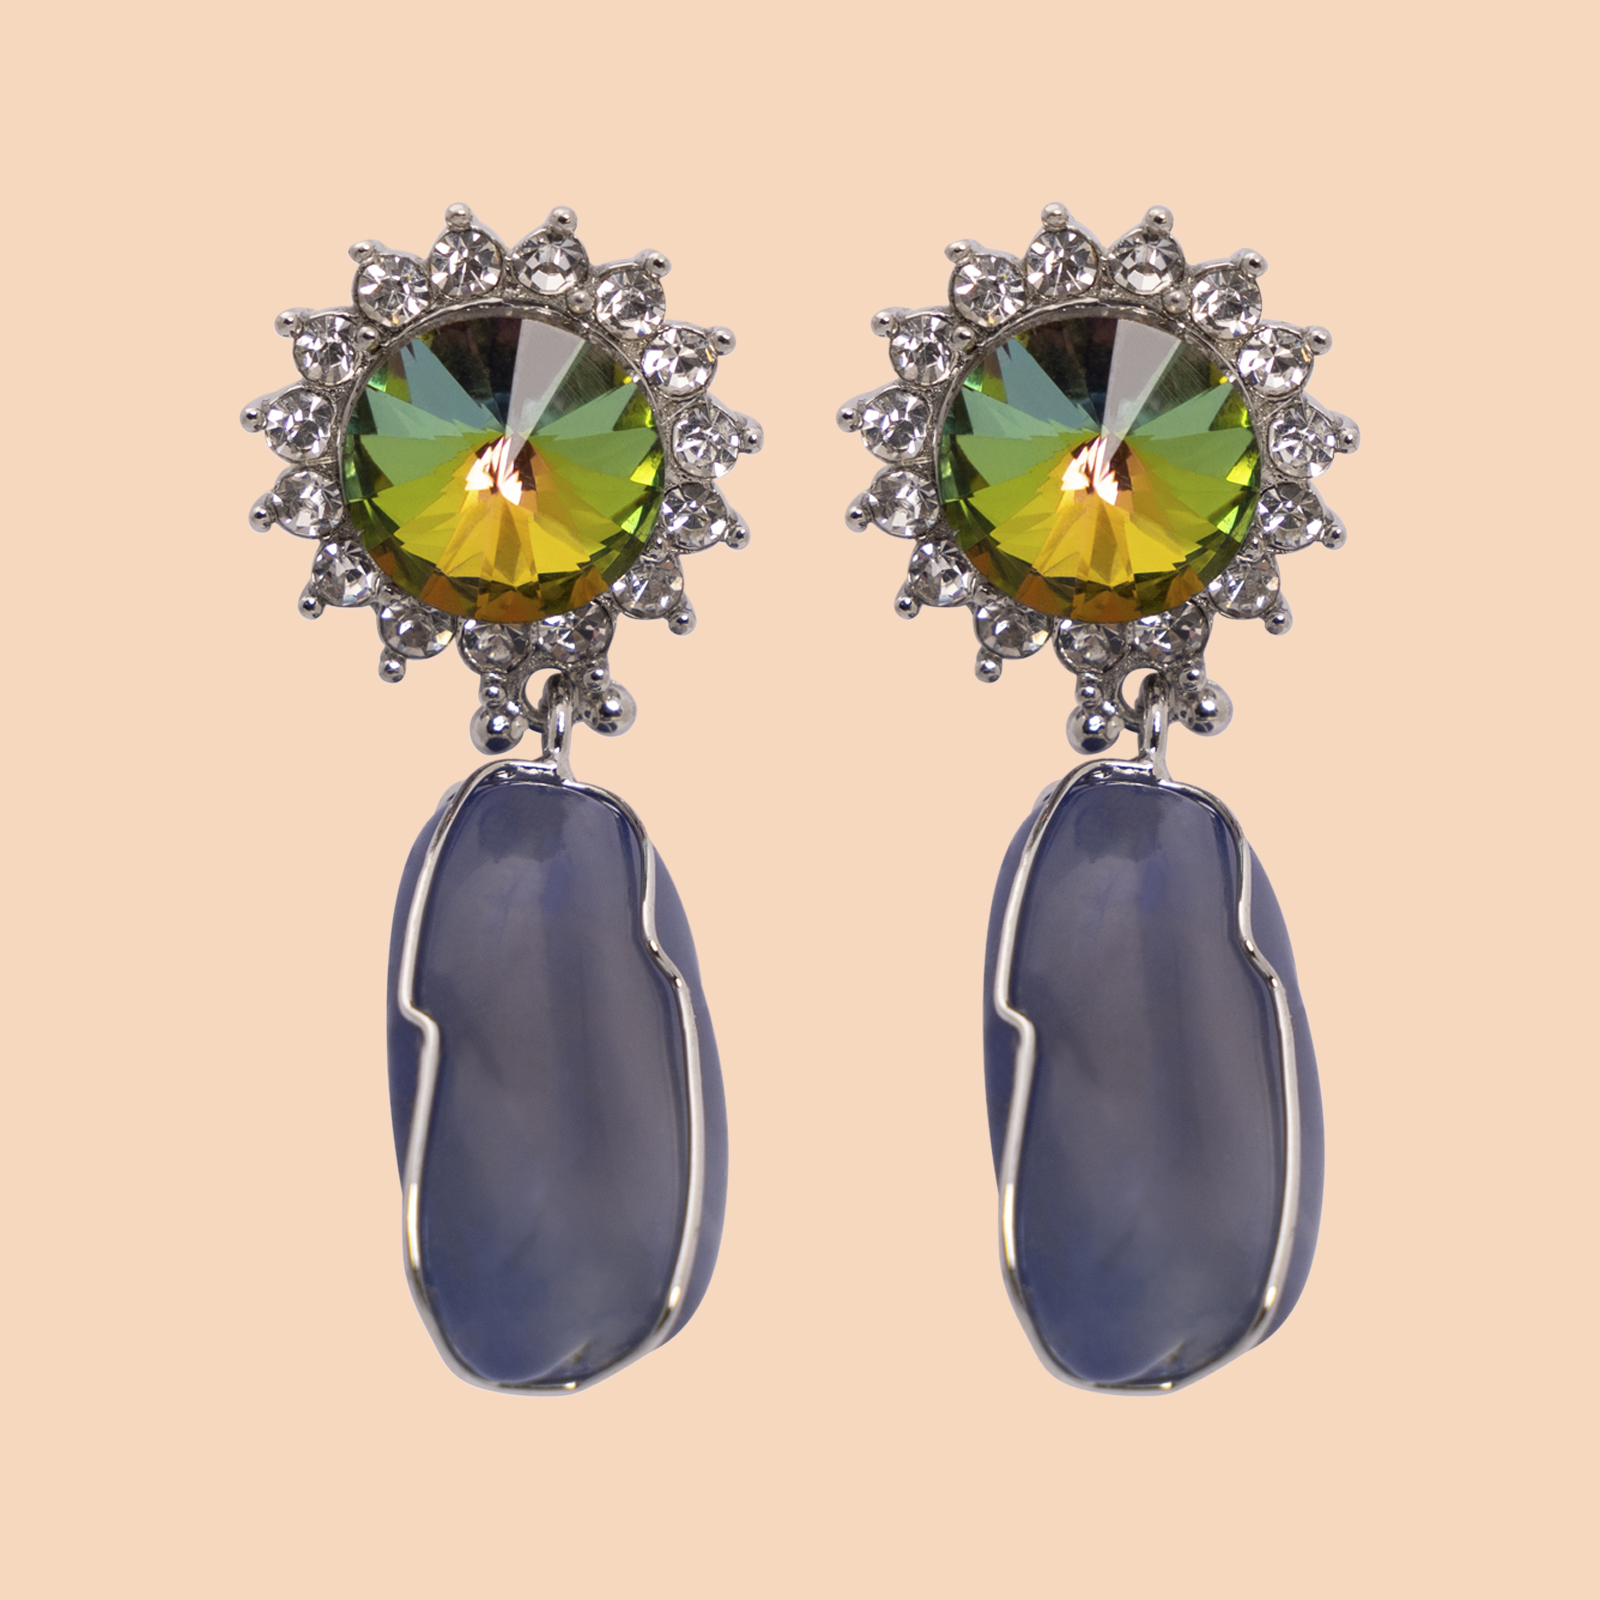 Colorful Marilyn Agate Nature Stone Earrings